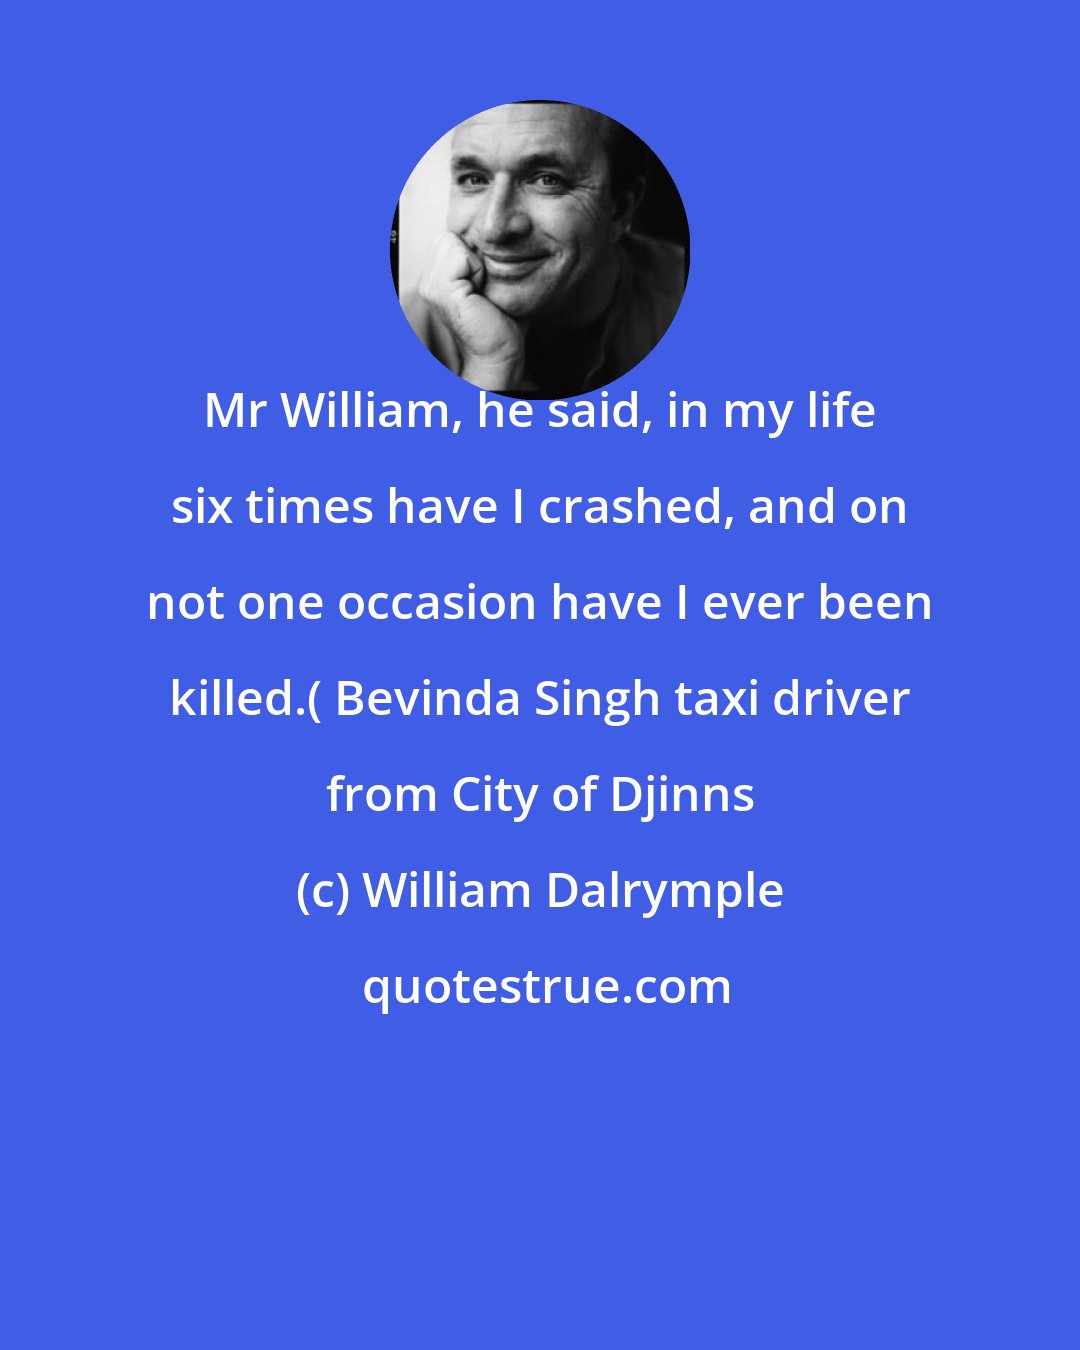 William Dalrymple: Mr William, he said, in my life six times have I crashed, and on not one occasion have I ever been killed.( Bevinda Singh taxi driver from City of Djinns